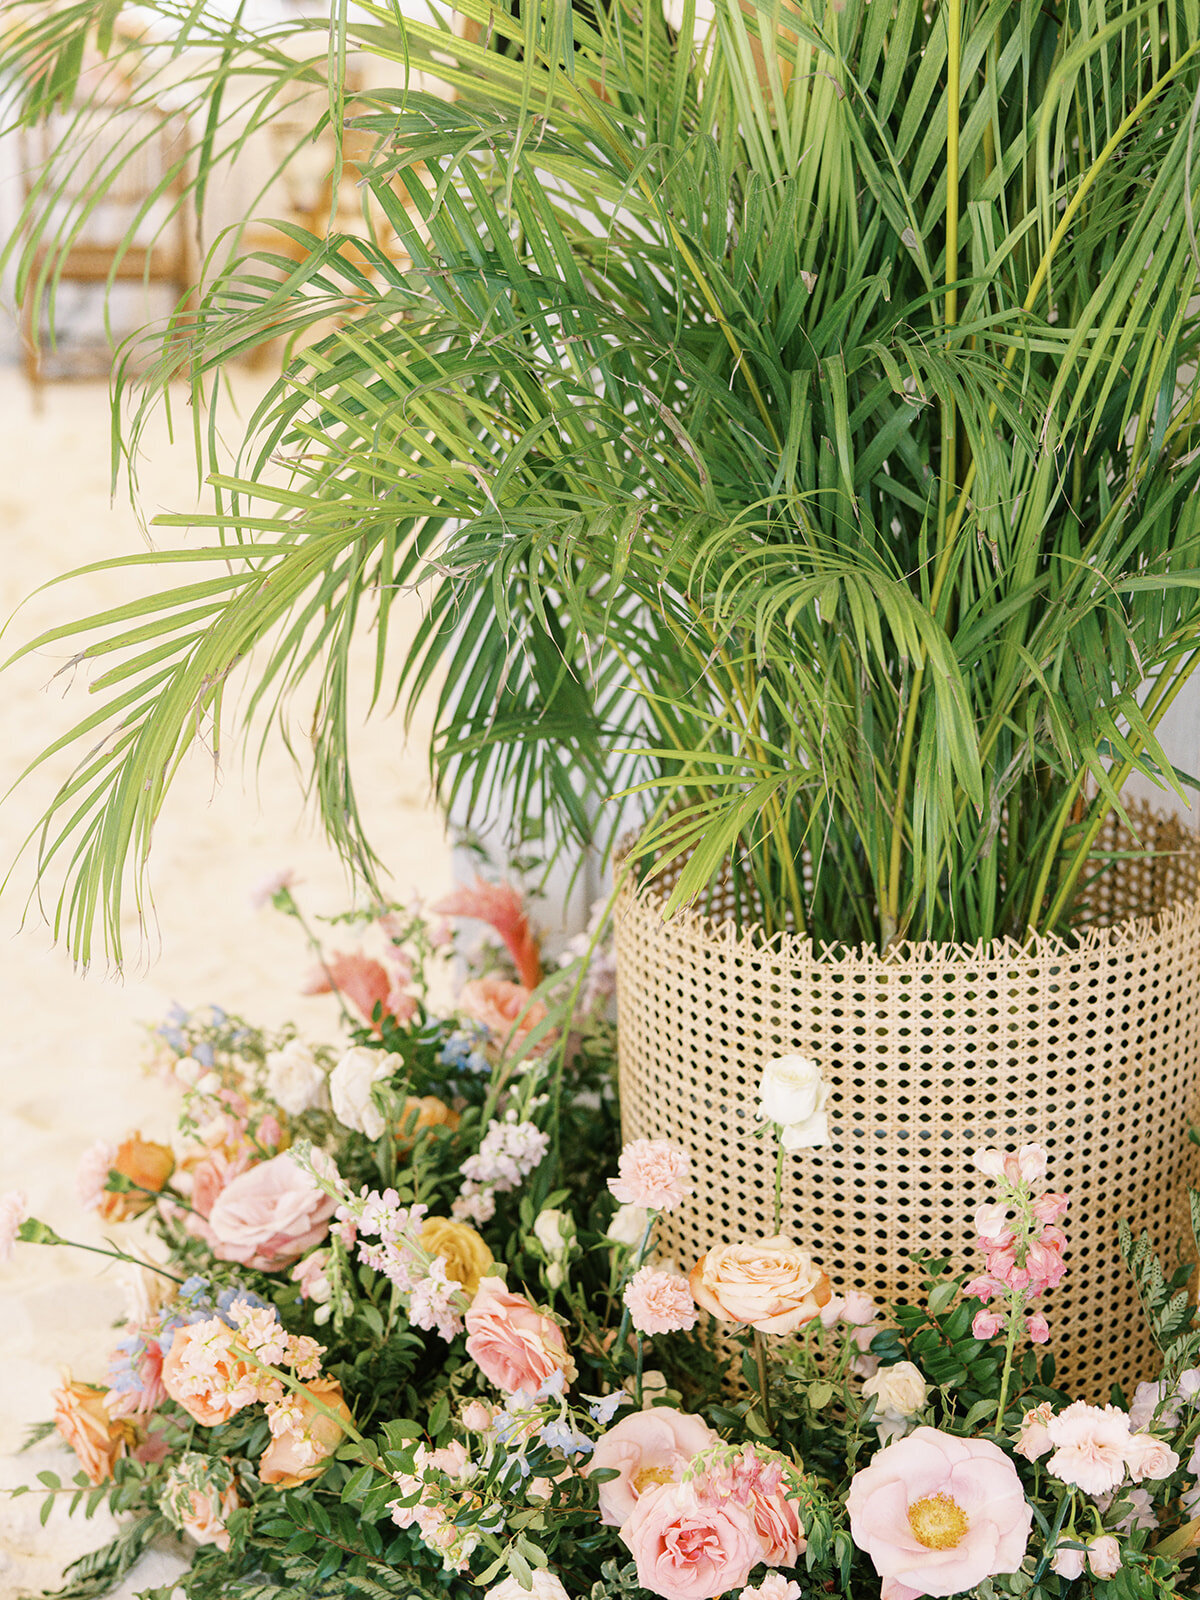 Tropical floral arrangements and floor meadows for tented private estate spring destination beach wedding reception in Exuma, Bahamas. Orchids and roses in tropical colors of orange, pink, lavender, dusty blue pale yellow and natural greens. Destination floral design by Rosemary & Finch Floral Design.